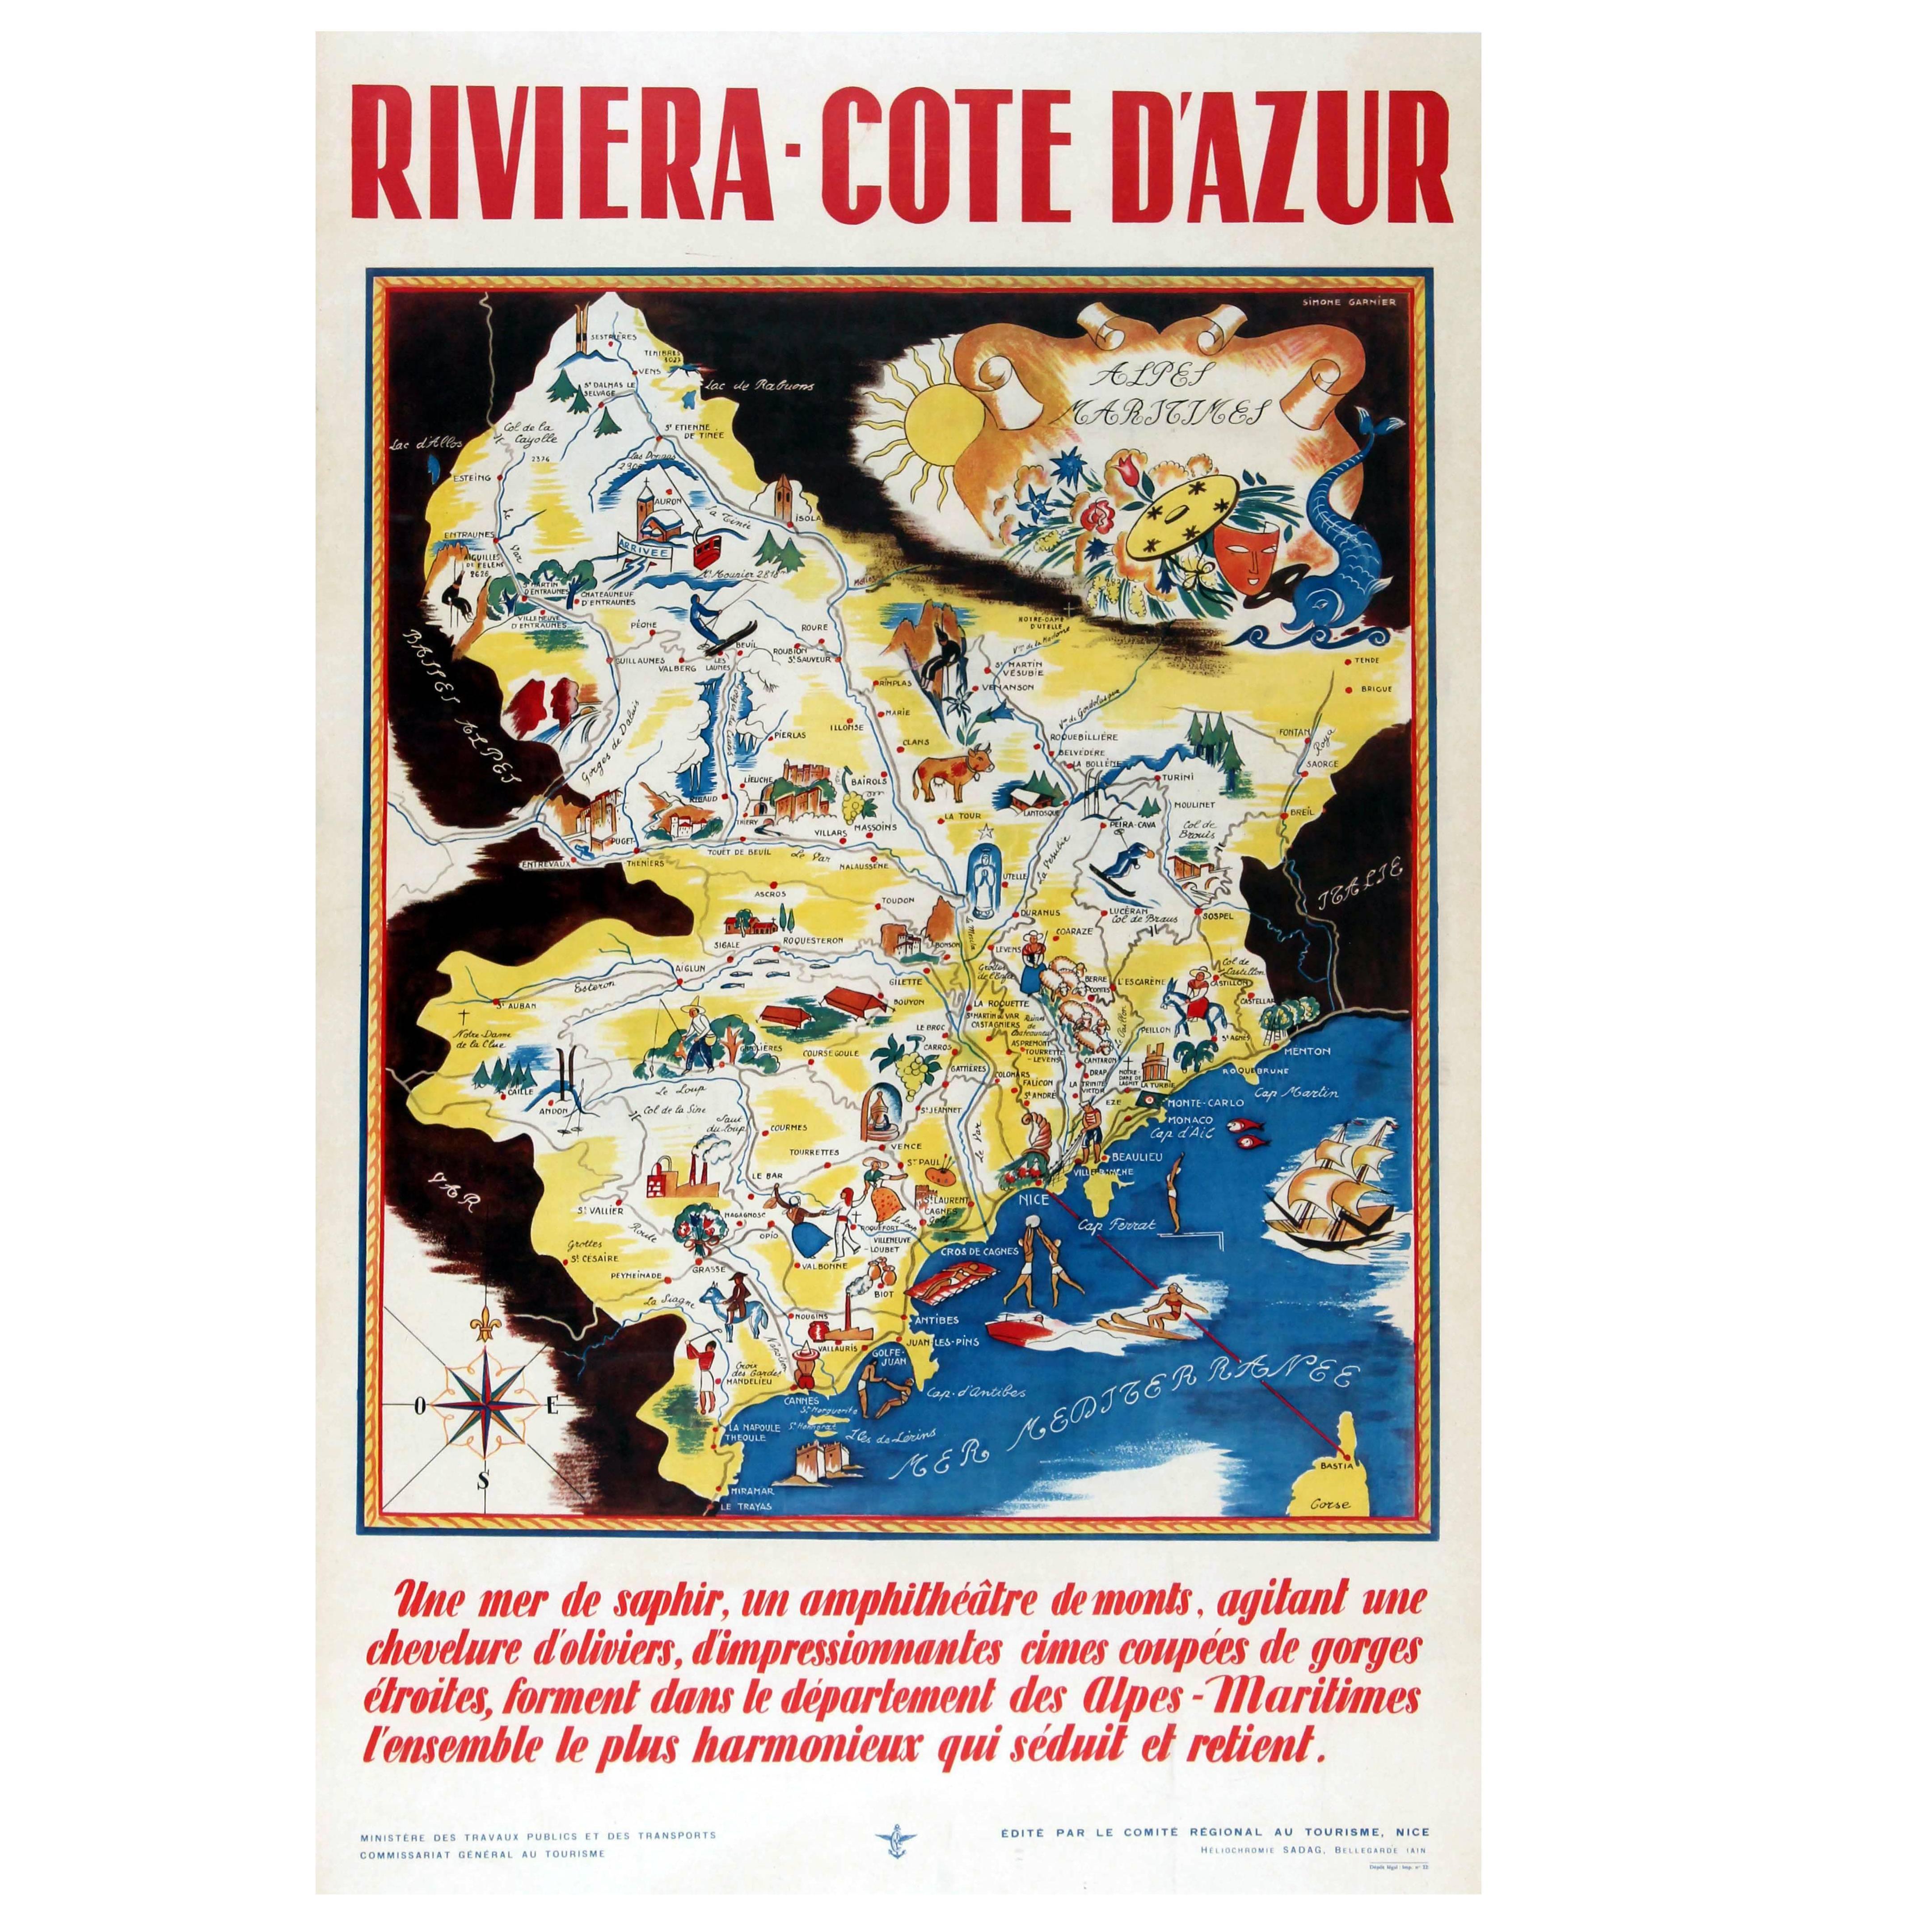 Original Vintage 1930s Travel Advertising Poster for The Riviera – Cote d'Azur